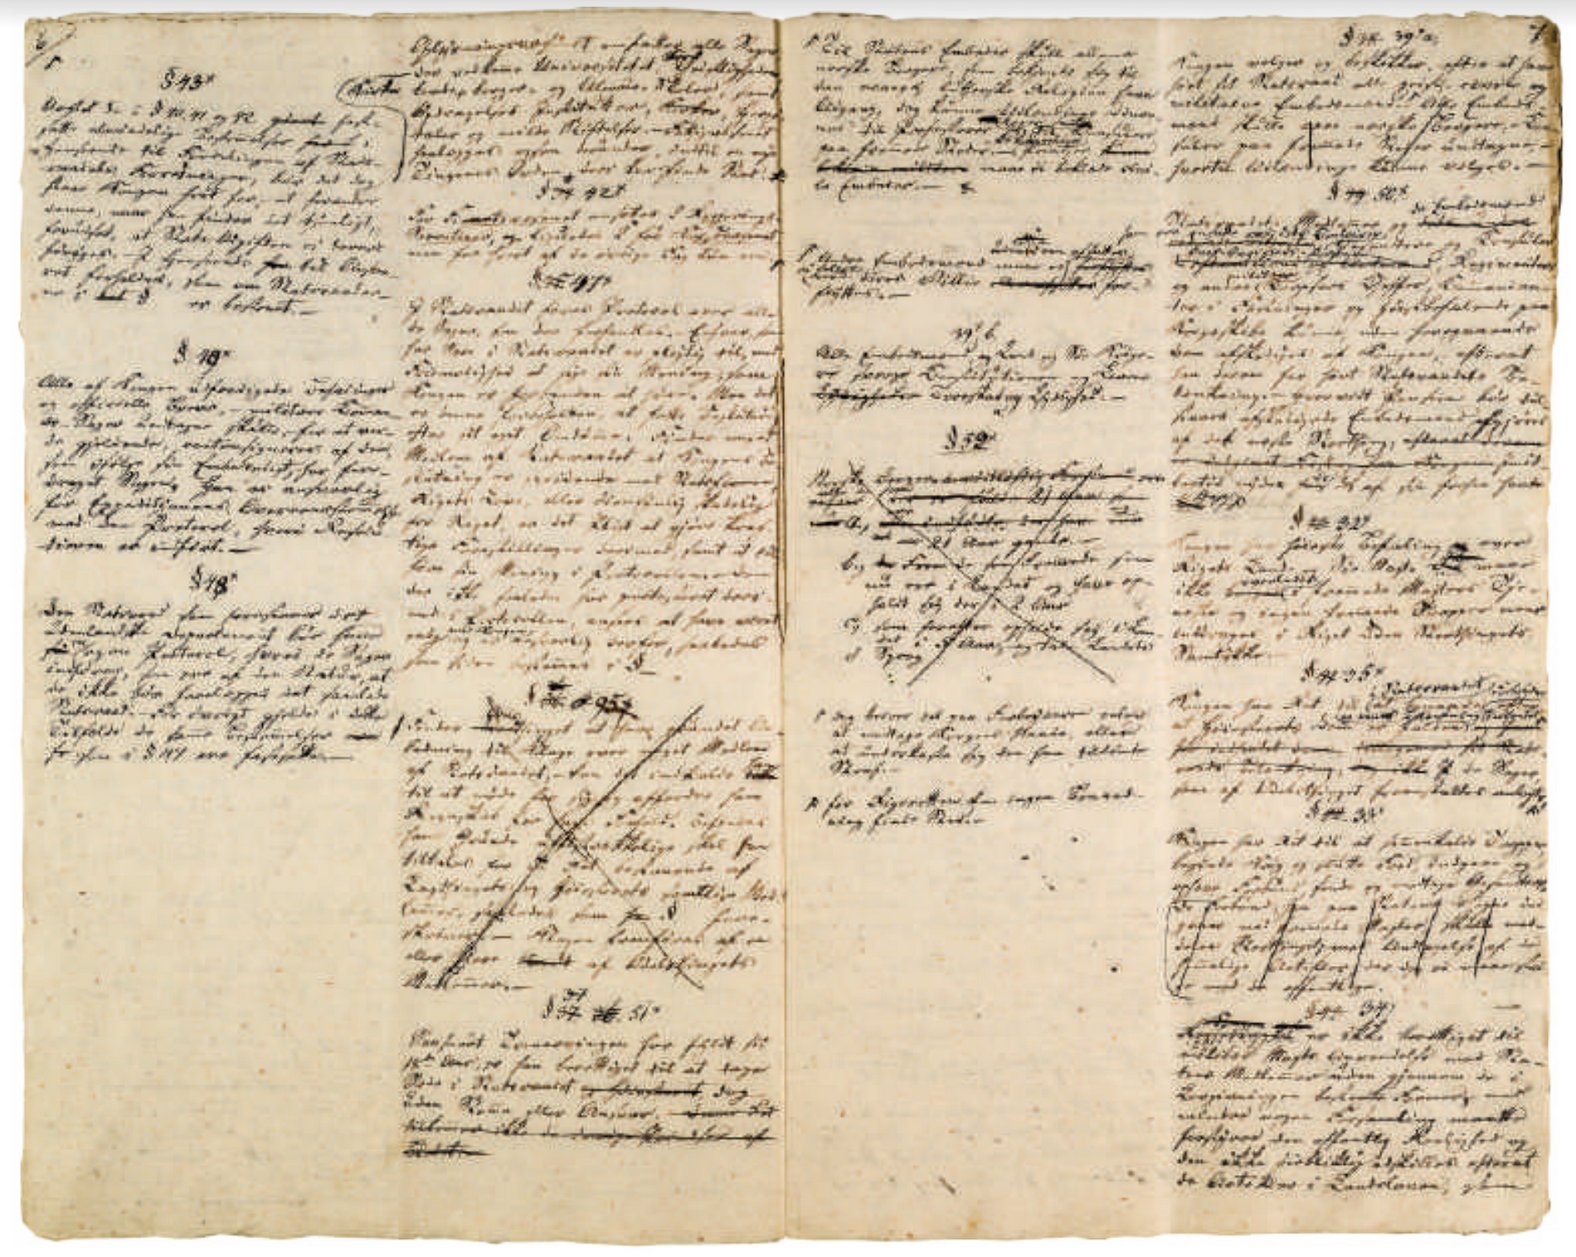 National Archives of Norway, Norwegian Constitution 1814 – First draft, 05-1814, Eidsvoll (Norway), 20 pages, manuscript on paper; 22 x 31 cm. Ref. Code: EA-4029/Ga/L0009A/0009/0002.